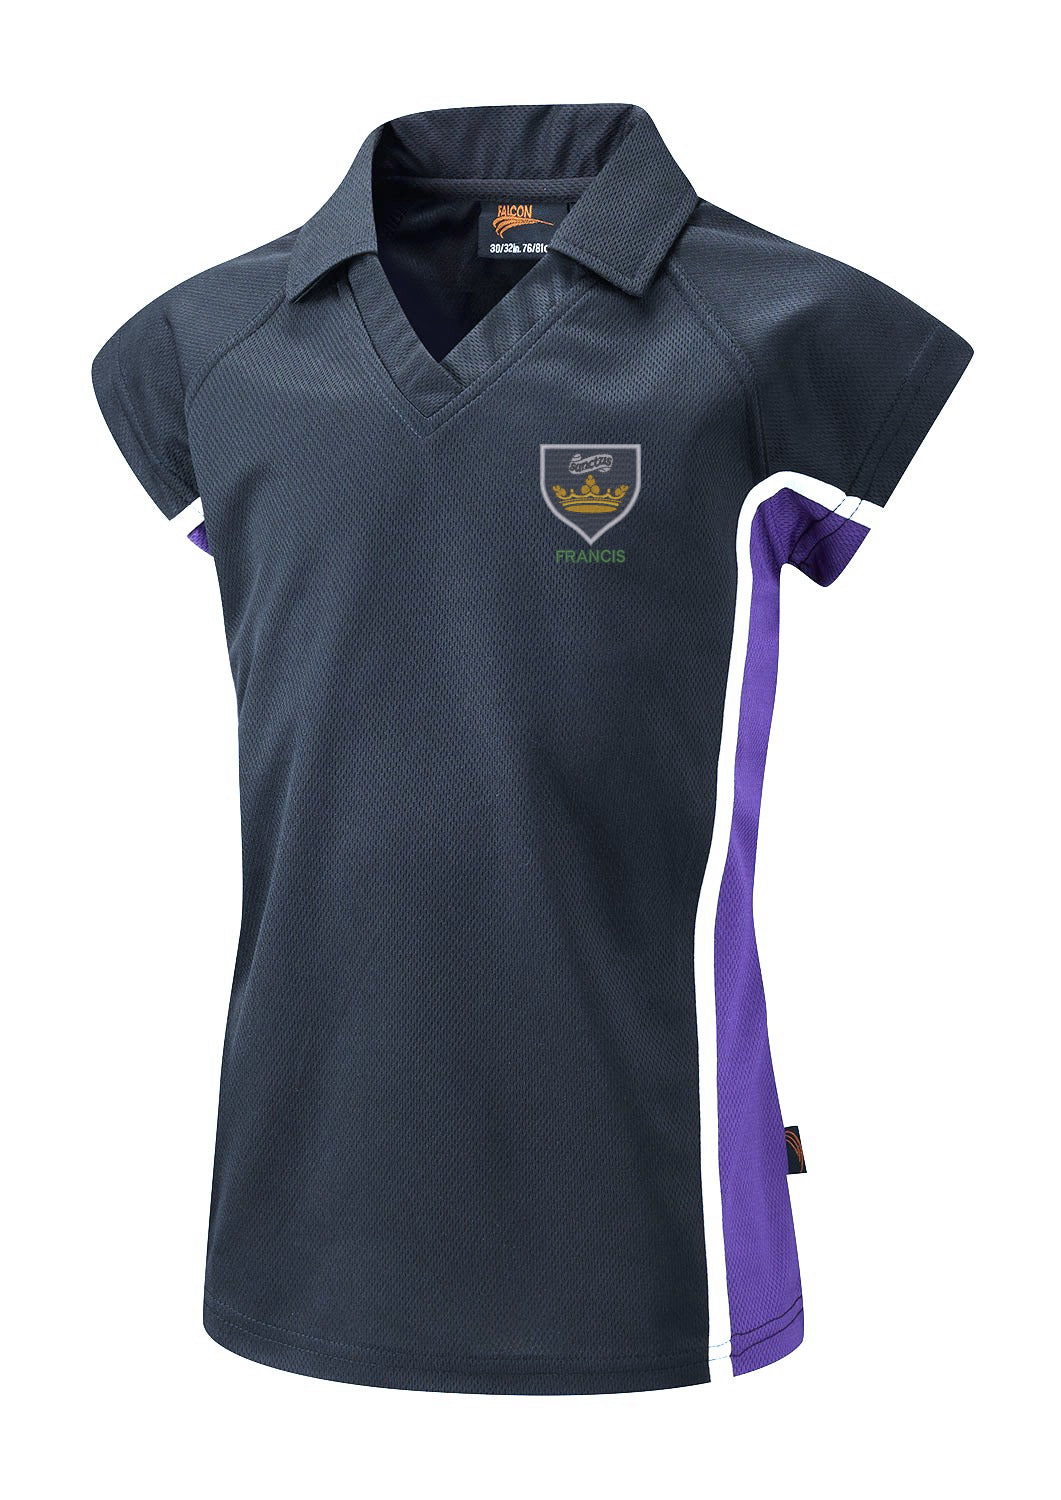 All Saints Navy, Purple And White Girls Sports Polo House Francis